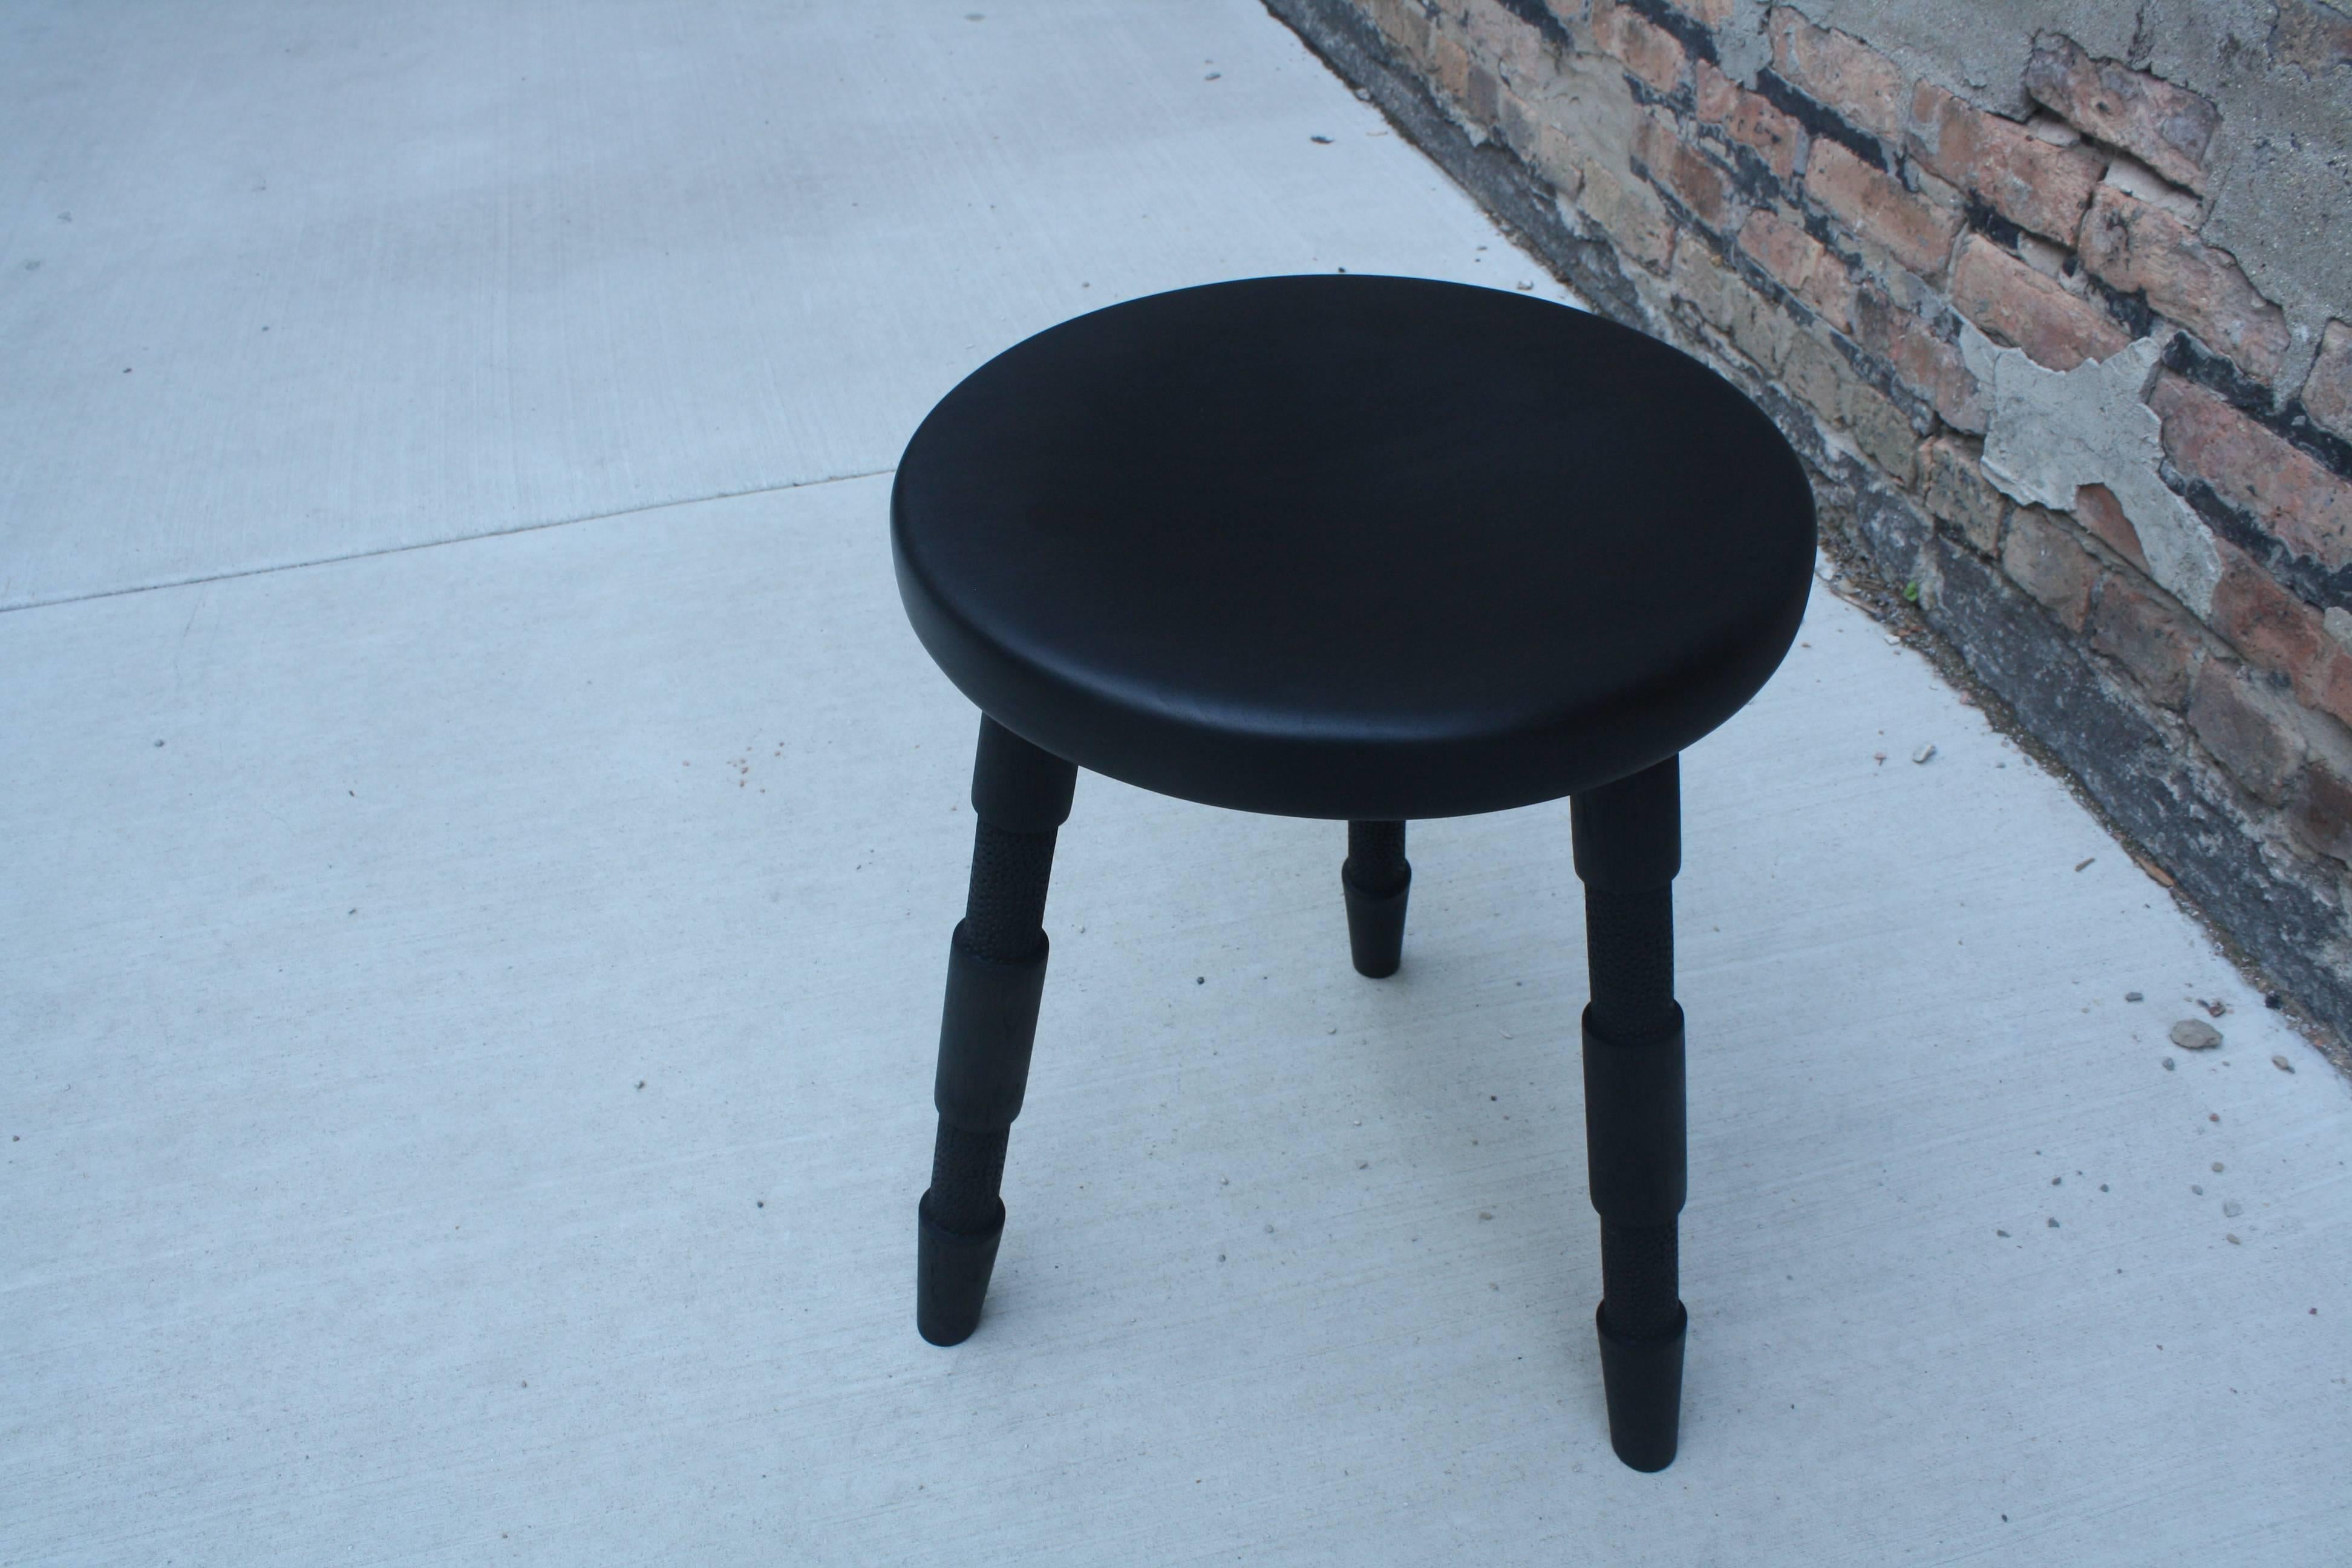 Modern Saddle, Handmade Wood Stool with Textured Legs and a Carved Seat For Sale